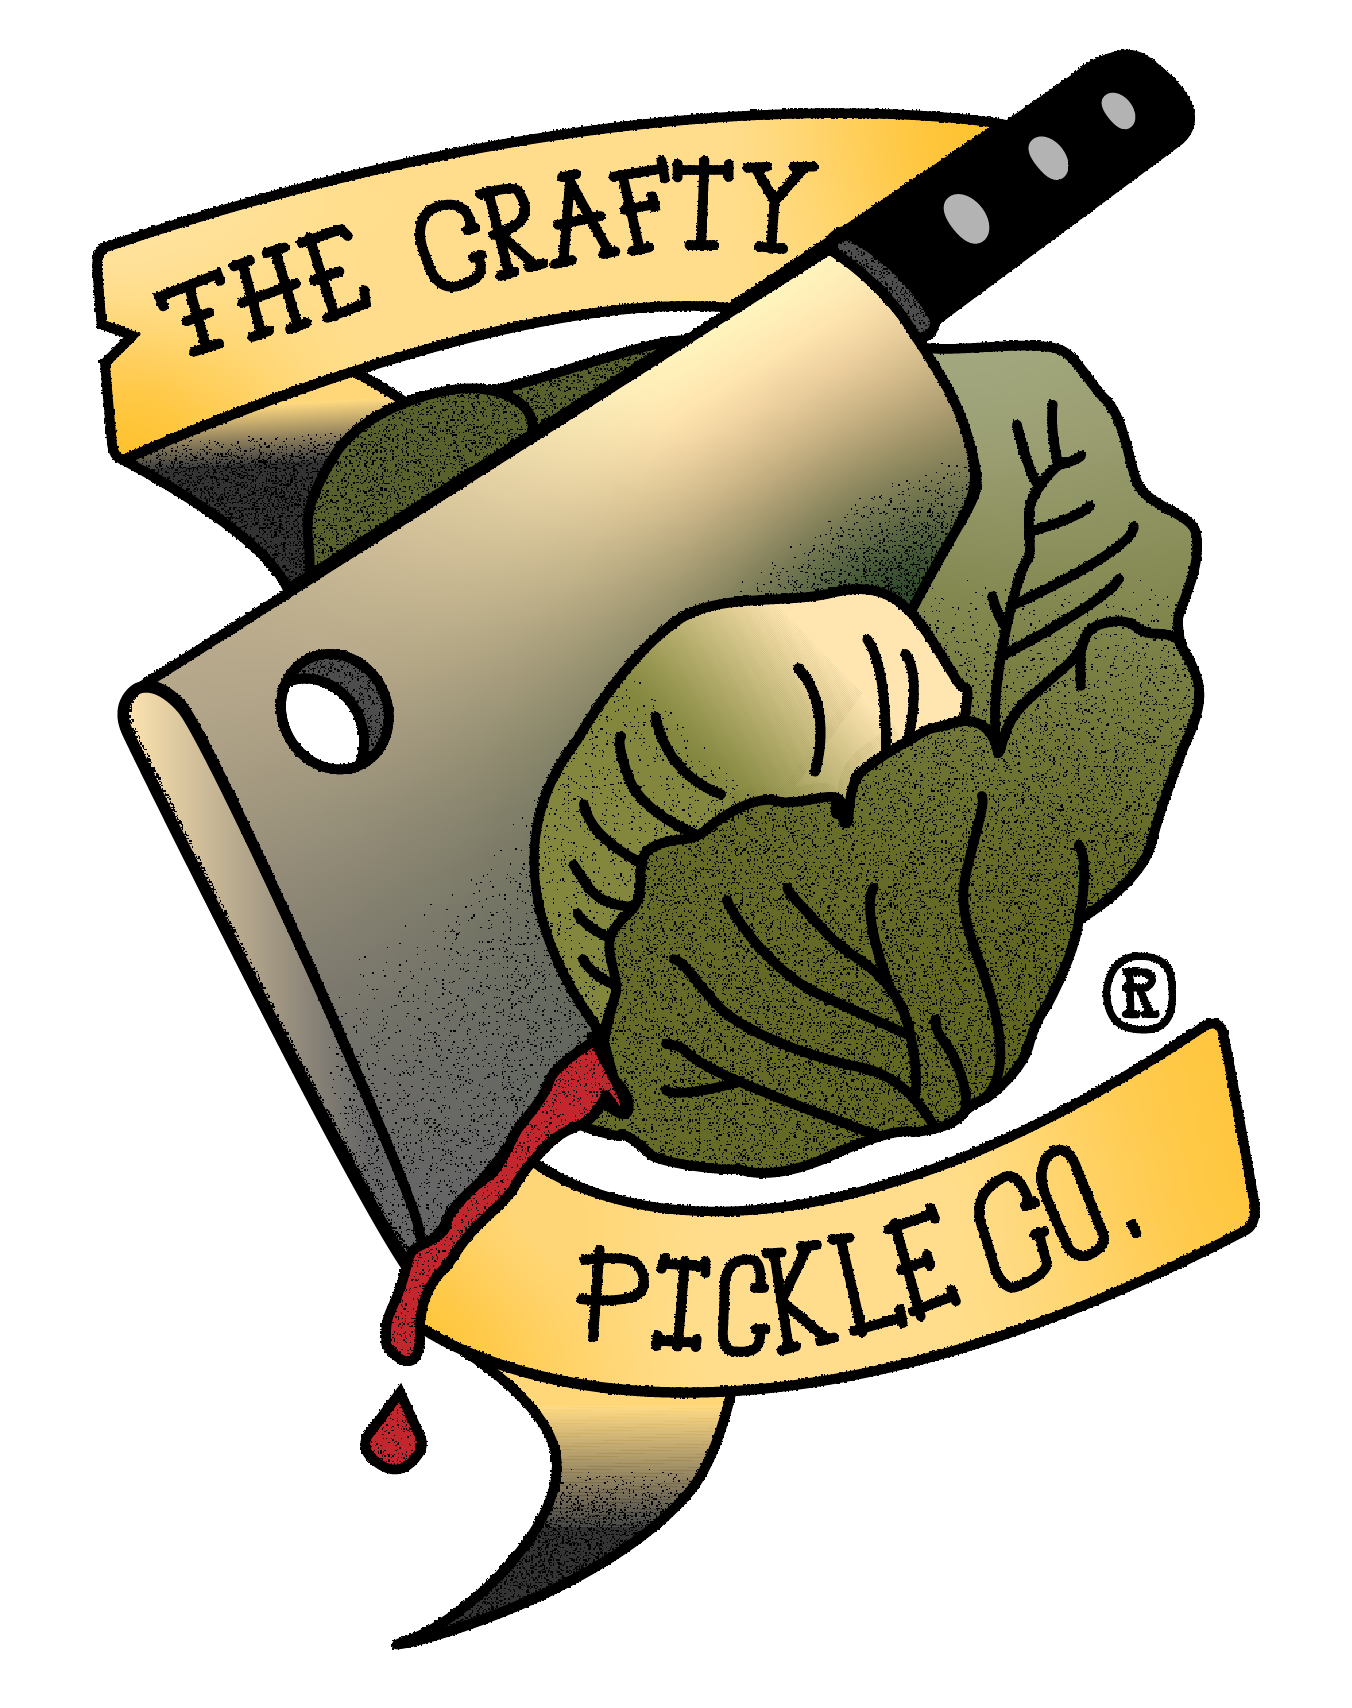 The Crafty Pickle Co.